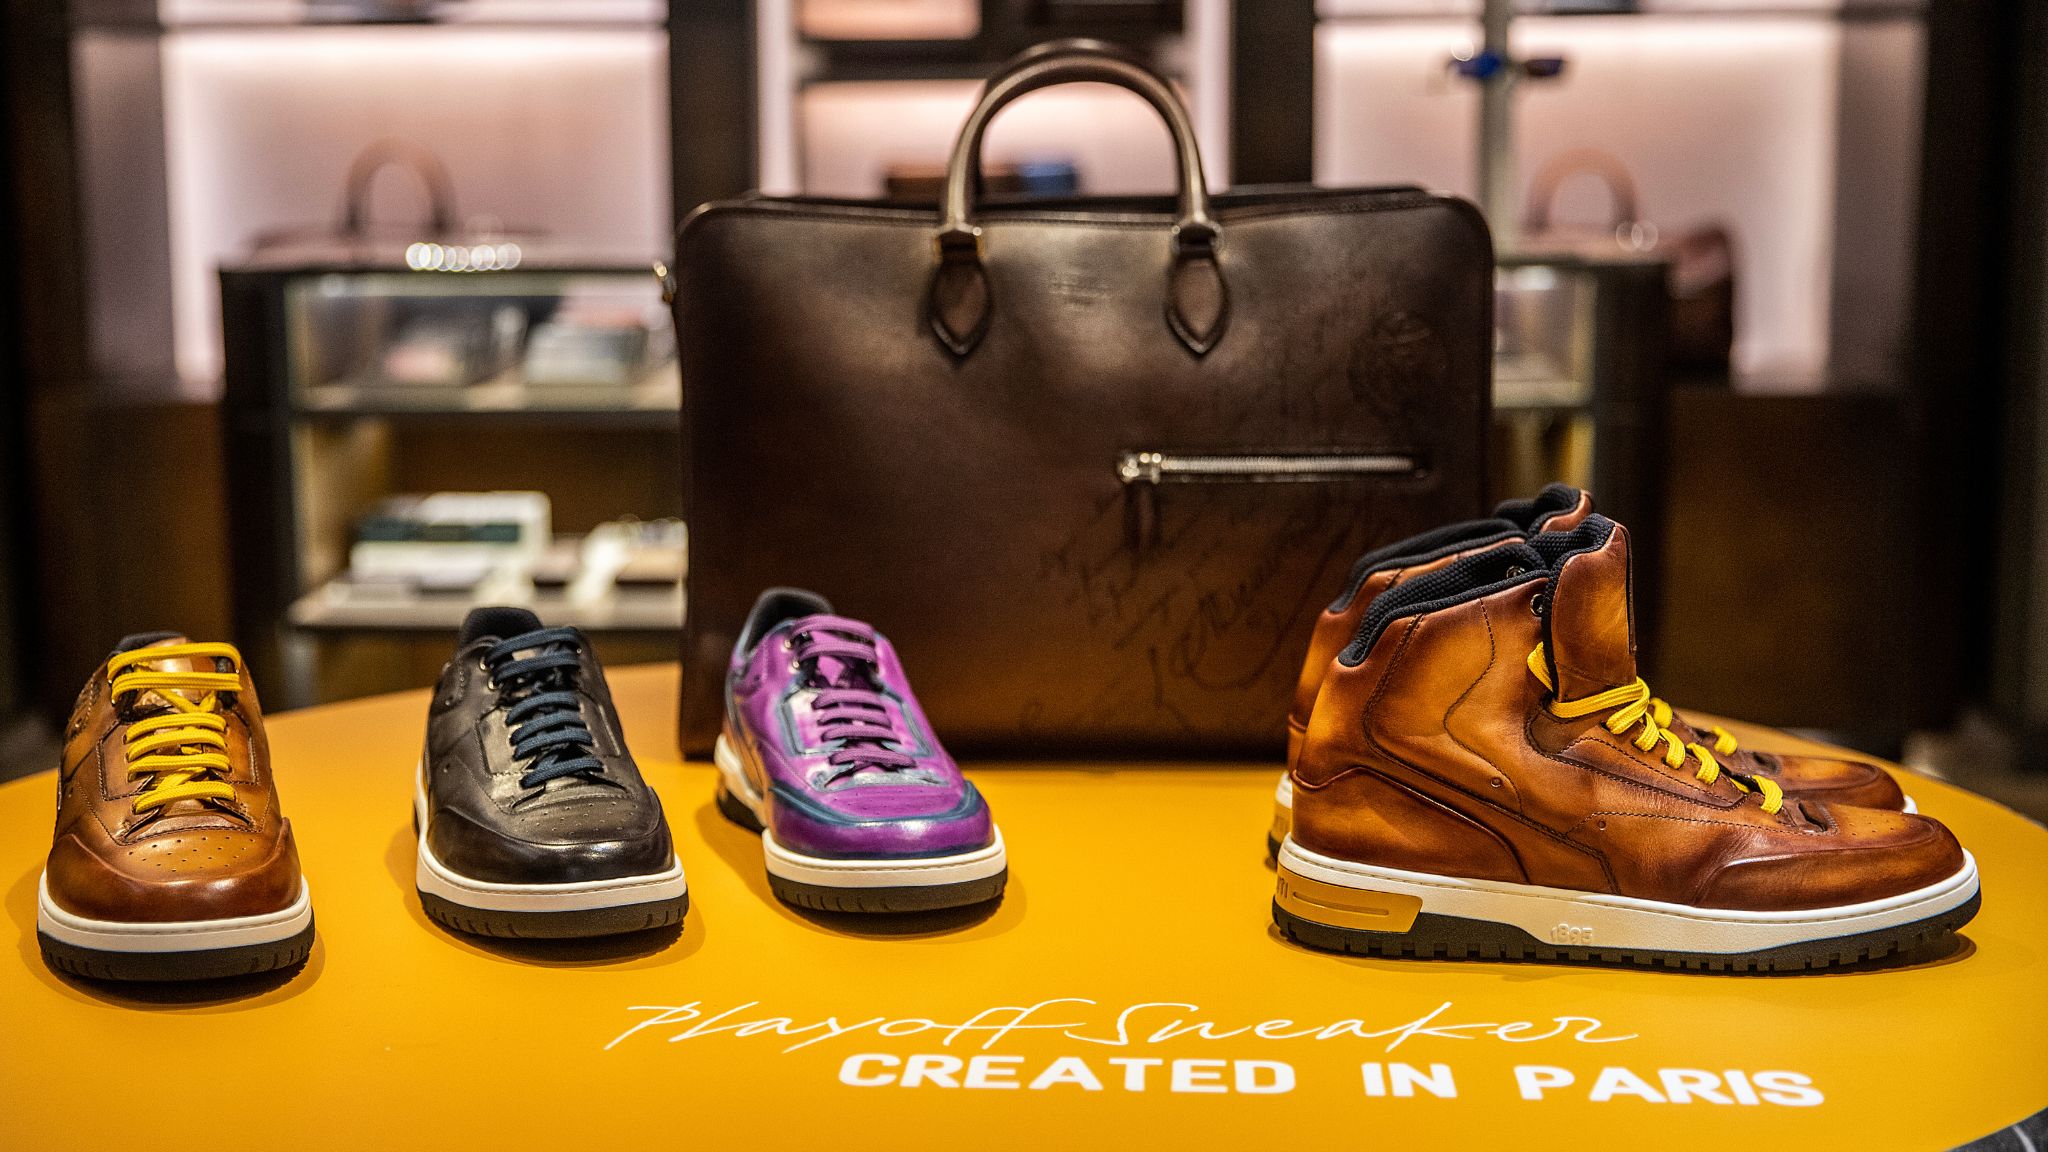 Berluti Launches On Alibaba's Tmall With Playoff Sneakers Debut